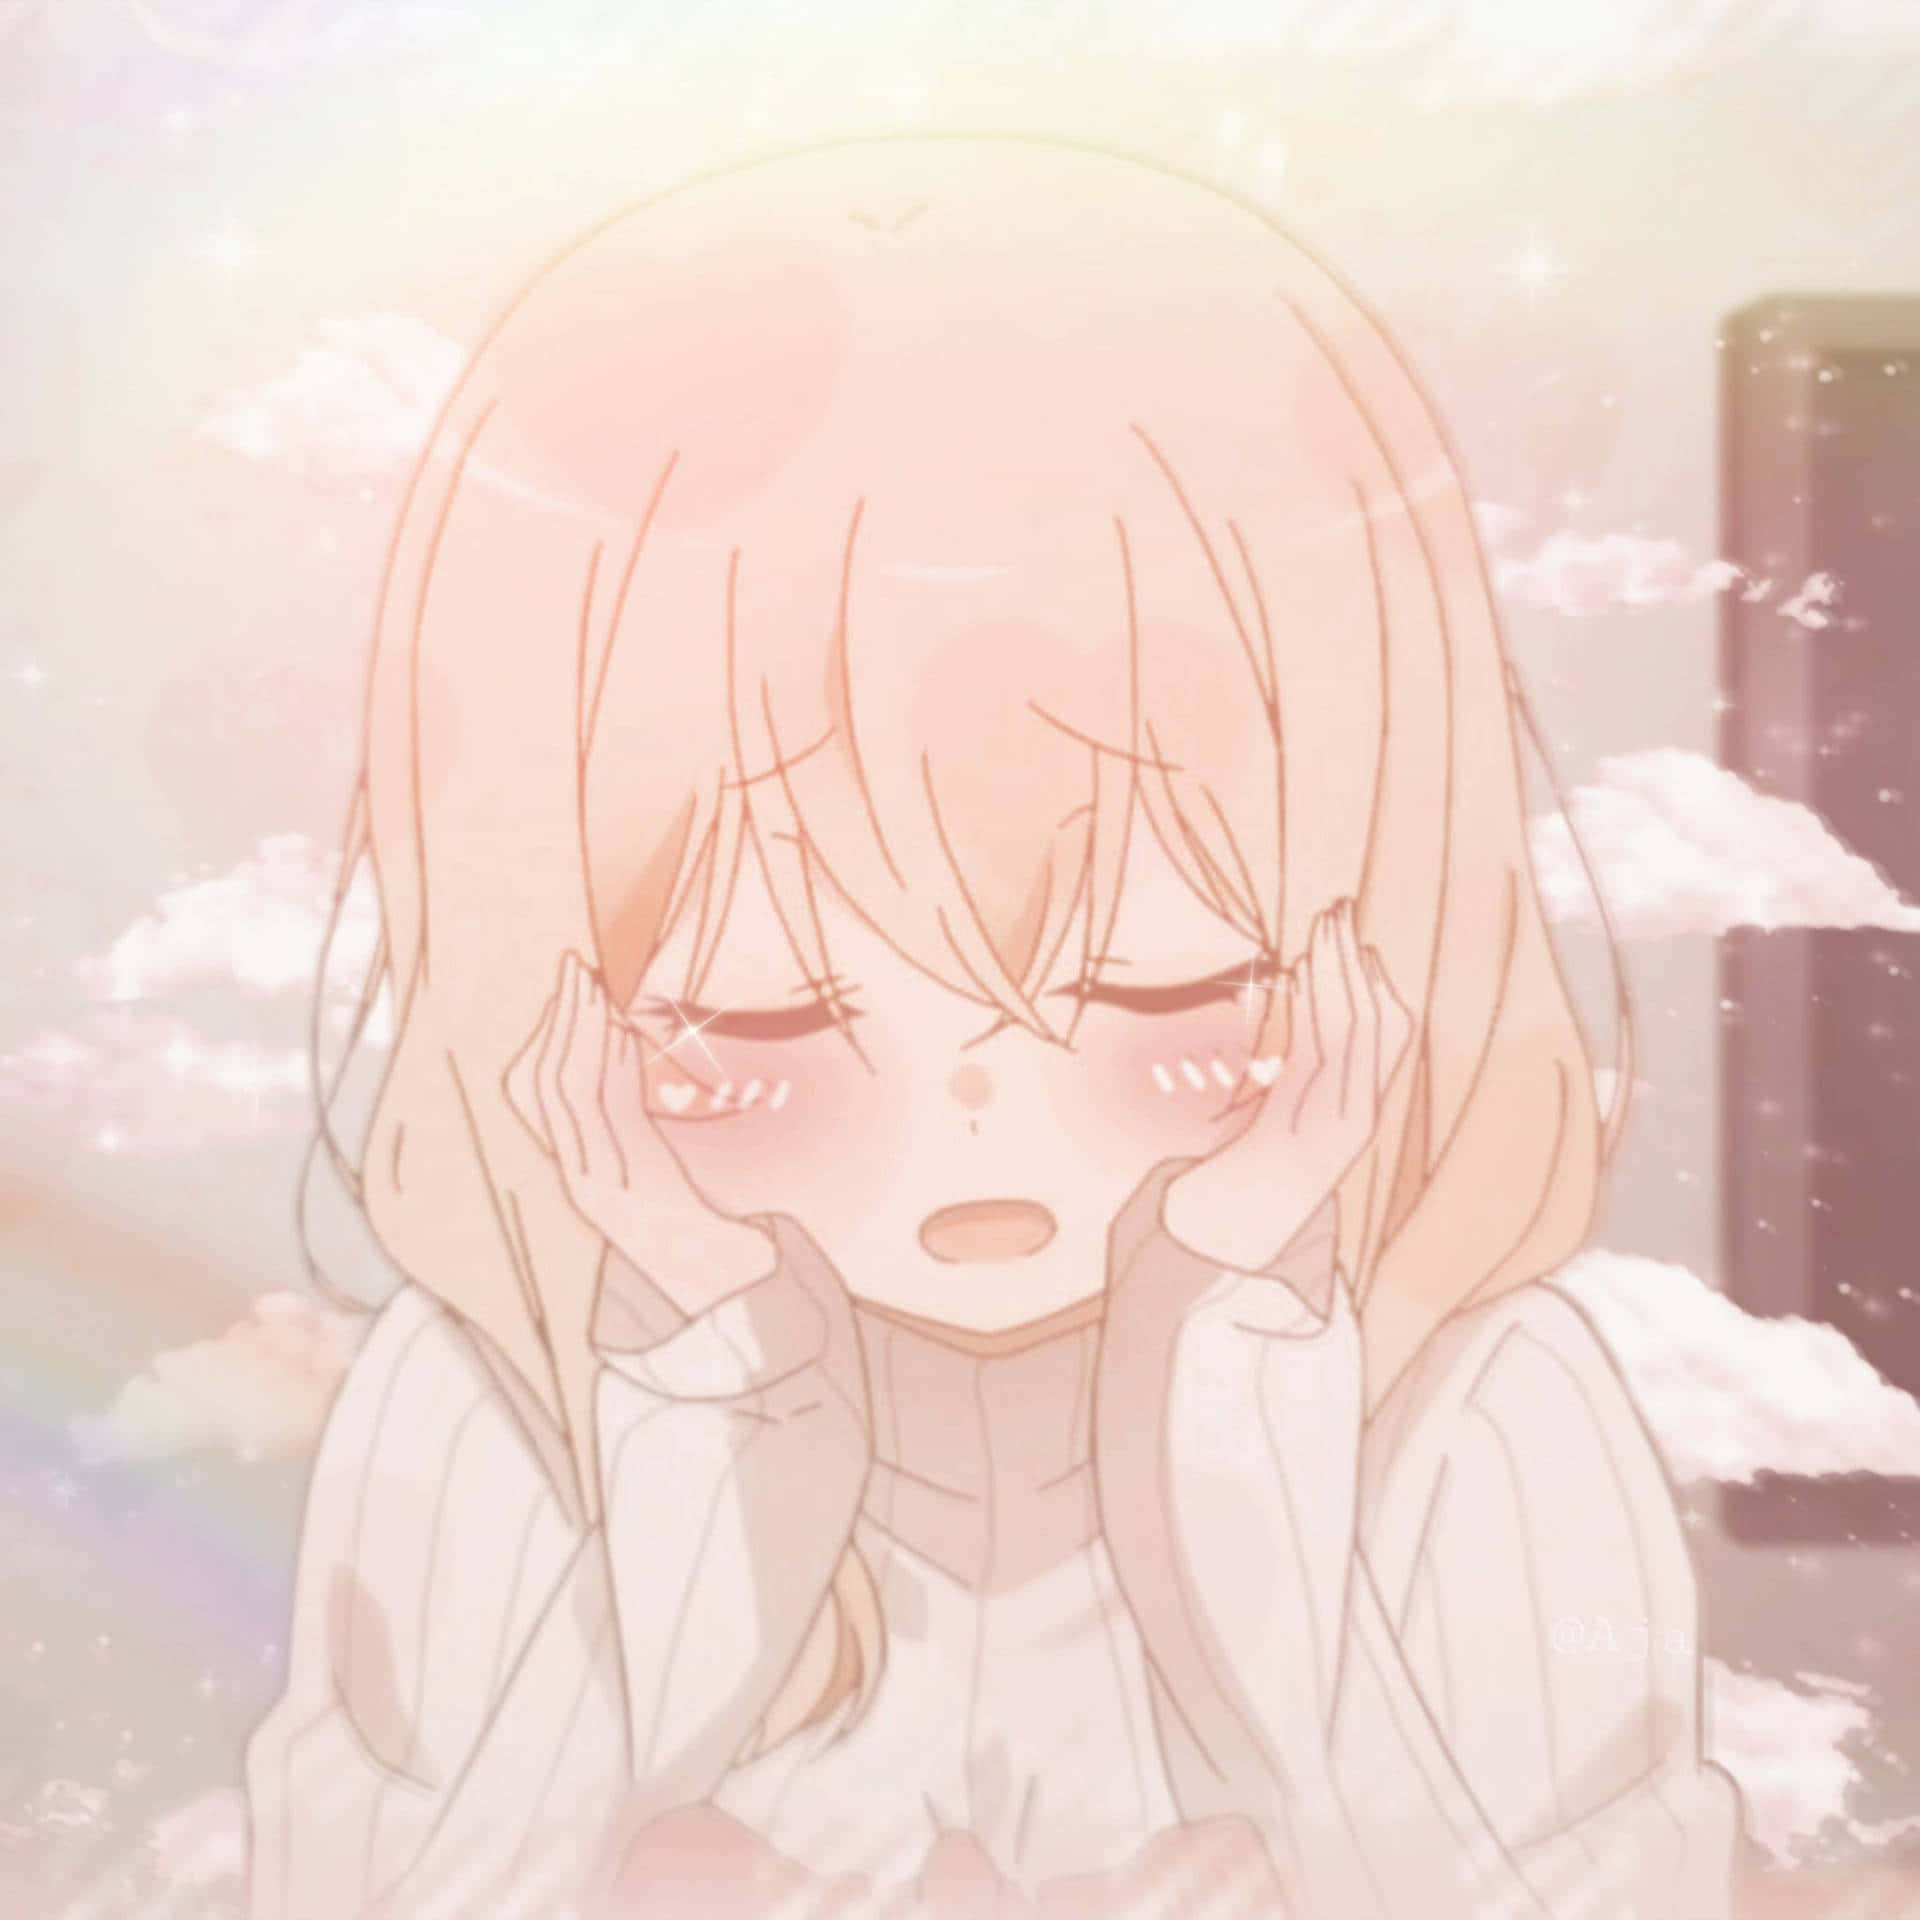 Download Anime Manga Kawaii Cute Adorable Blush Love Pink Pastel - Pink  Anime Girl Transparent PNG Image with No Background - PNGkey.com